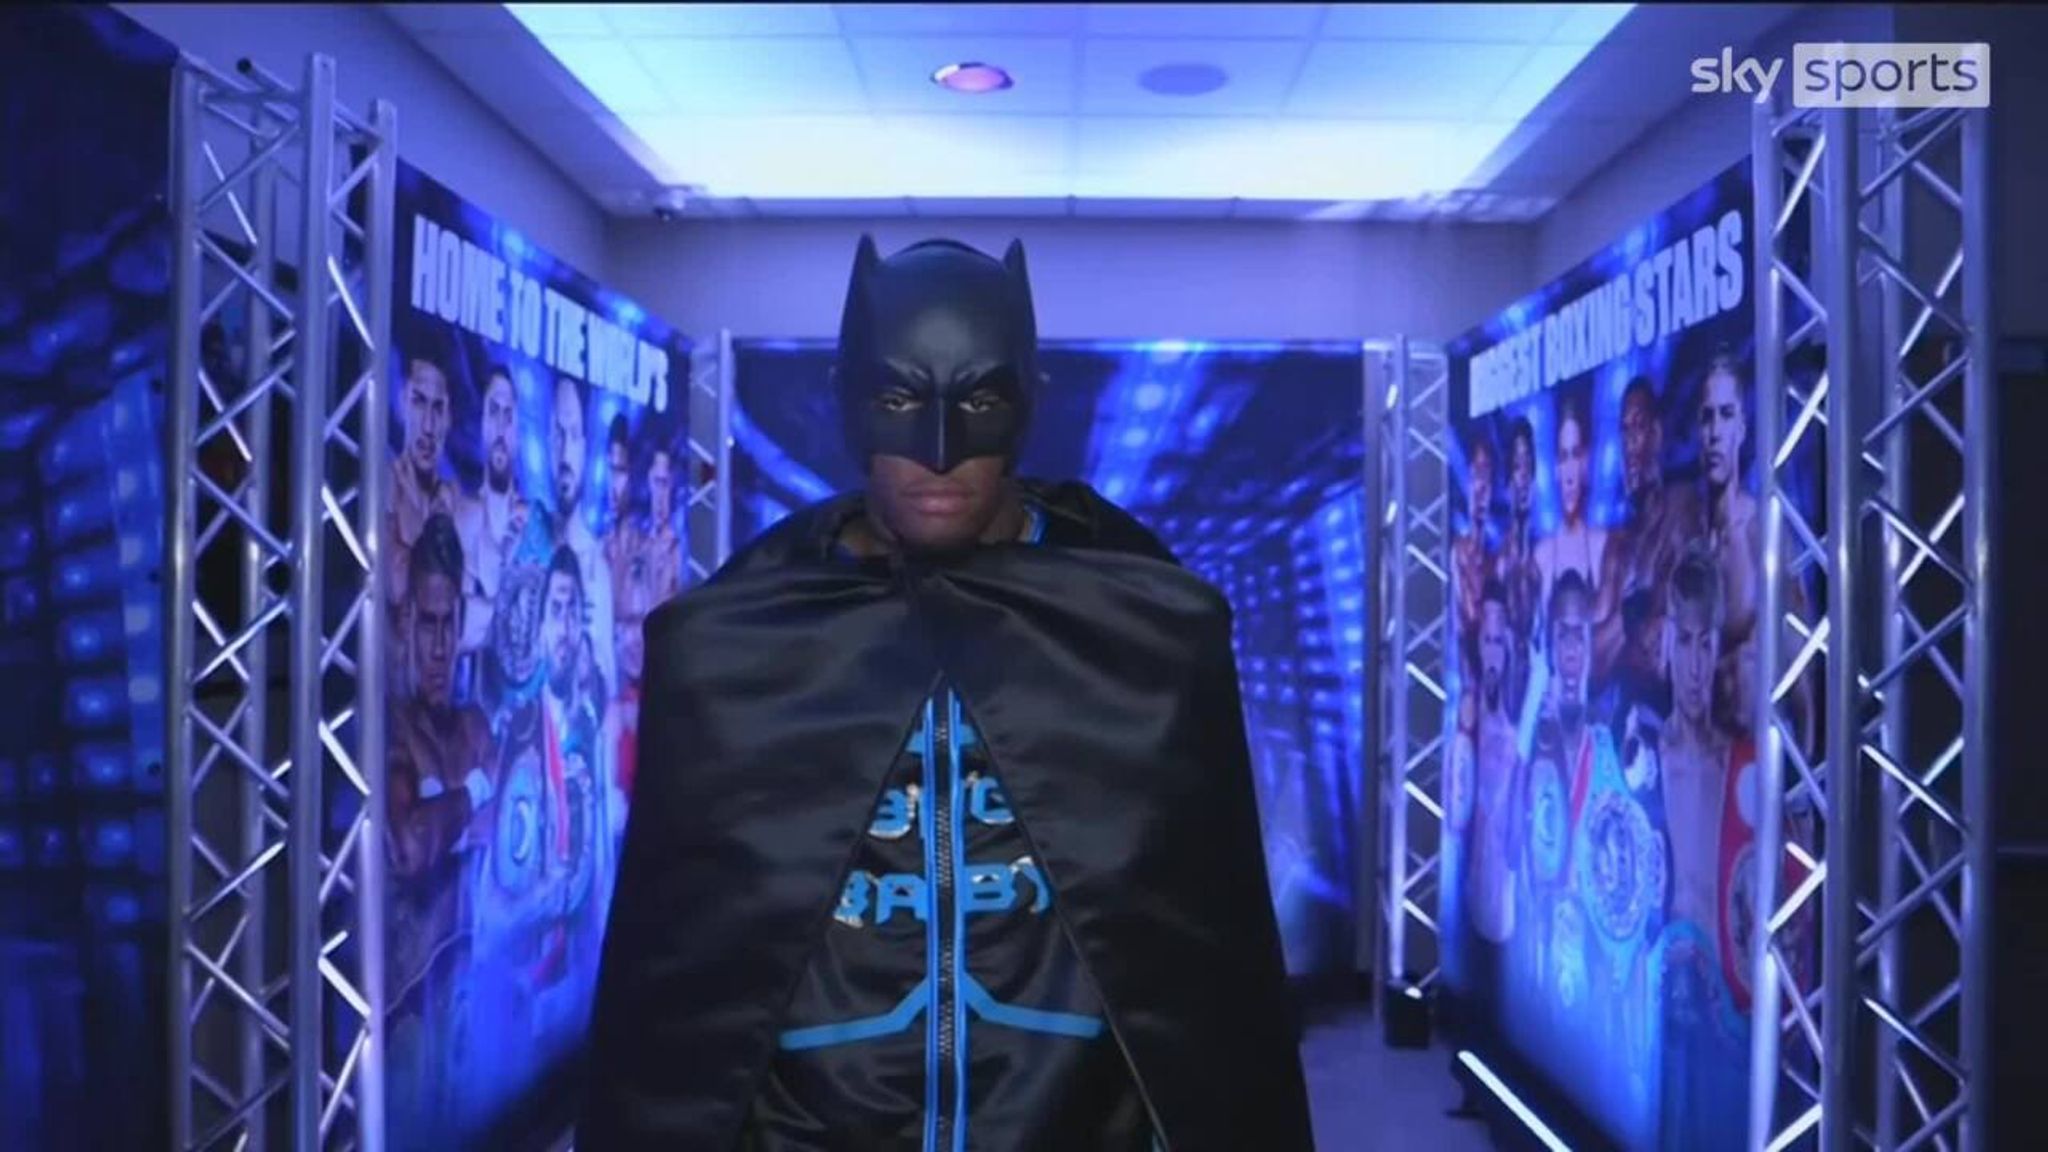 Jared Anderson pays tribute to brother with Batman ring walk Video Watch TV Show Sky Sports